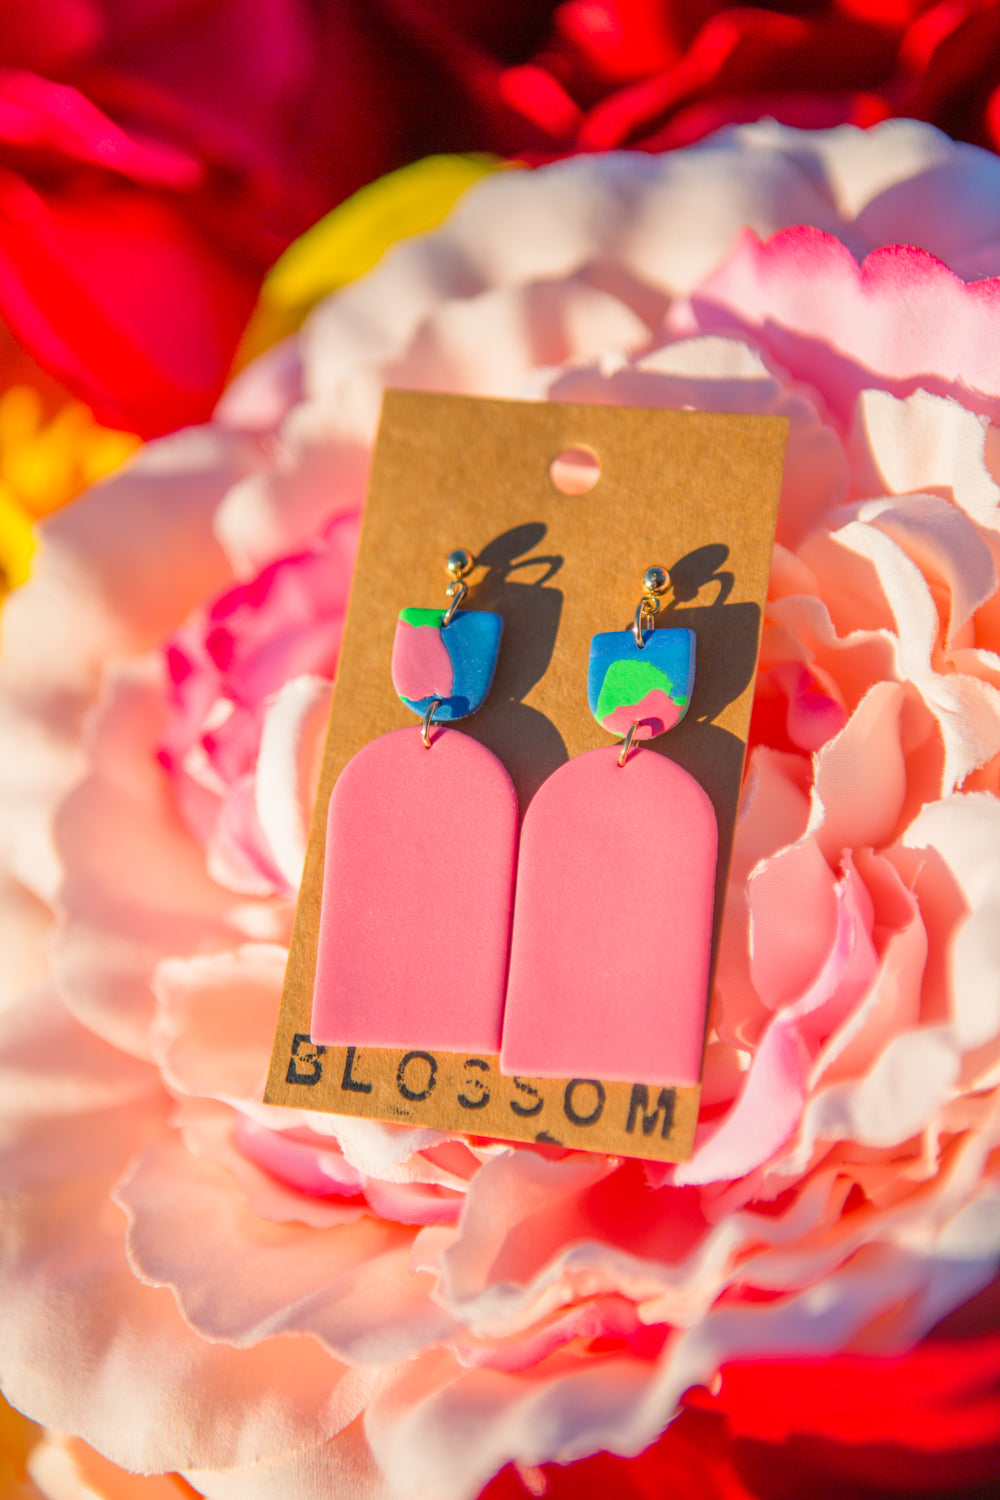 Mother Mary Earrings - "In Blossom" - Pink